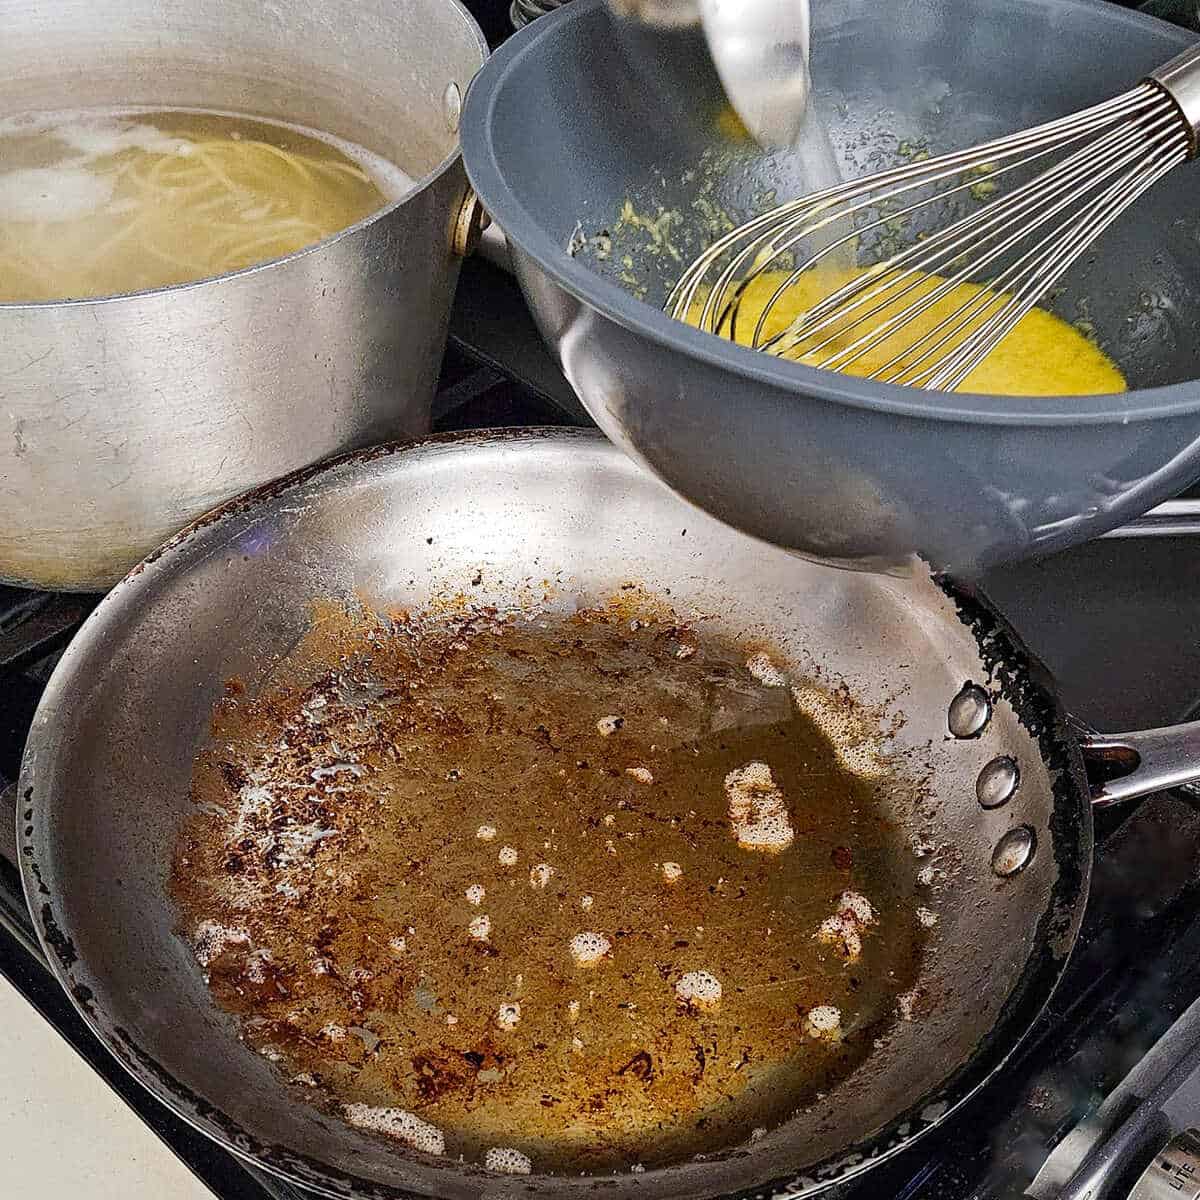 getting ready to add the egg and cheese mixture to the pan to create the pasta carbonara with mushrooms, the pasta is pictured in a pot of boiling water of to the side, ready to be added to the sauce